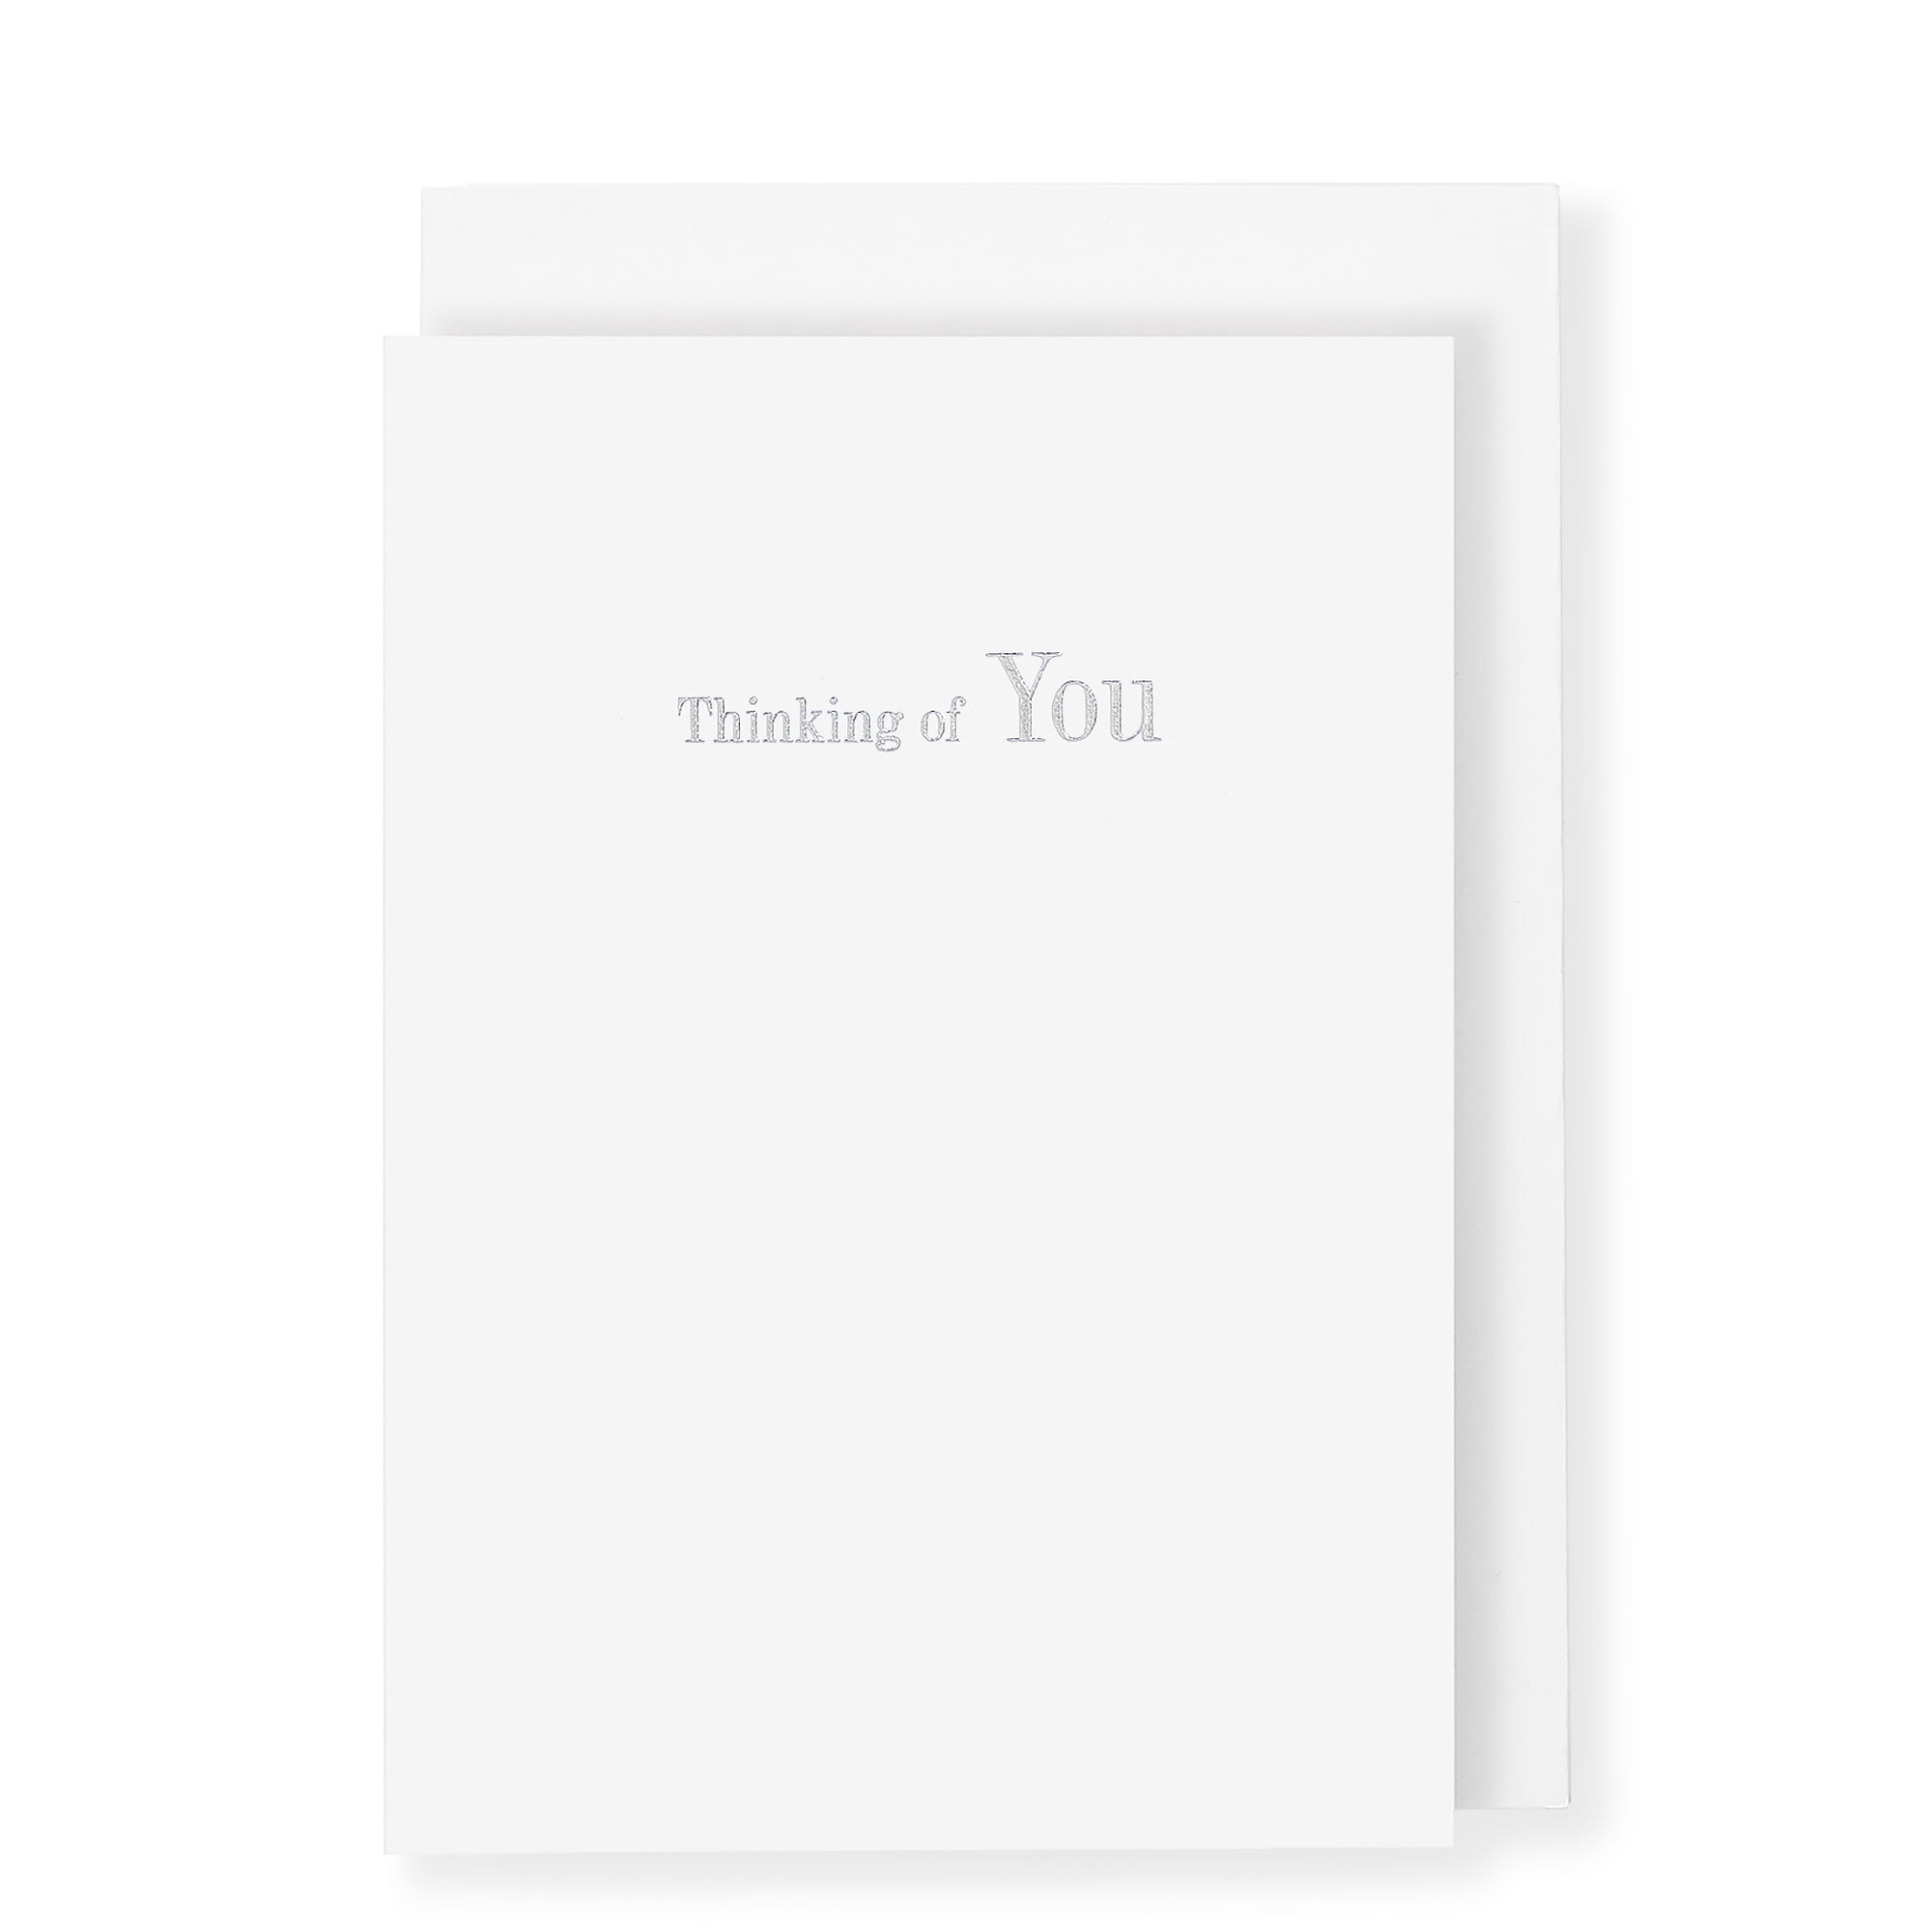 Thinking of You Card, White